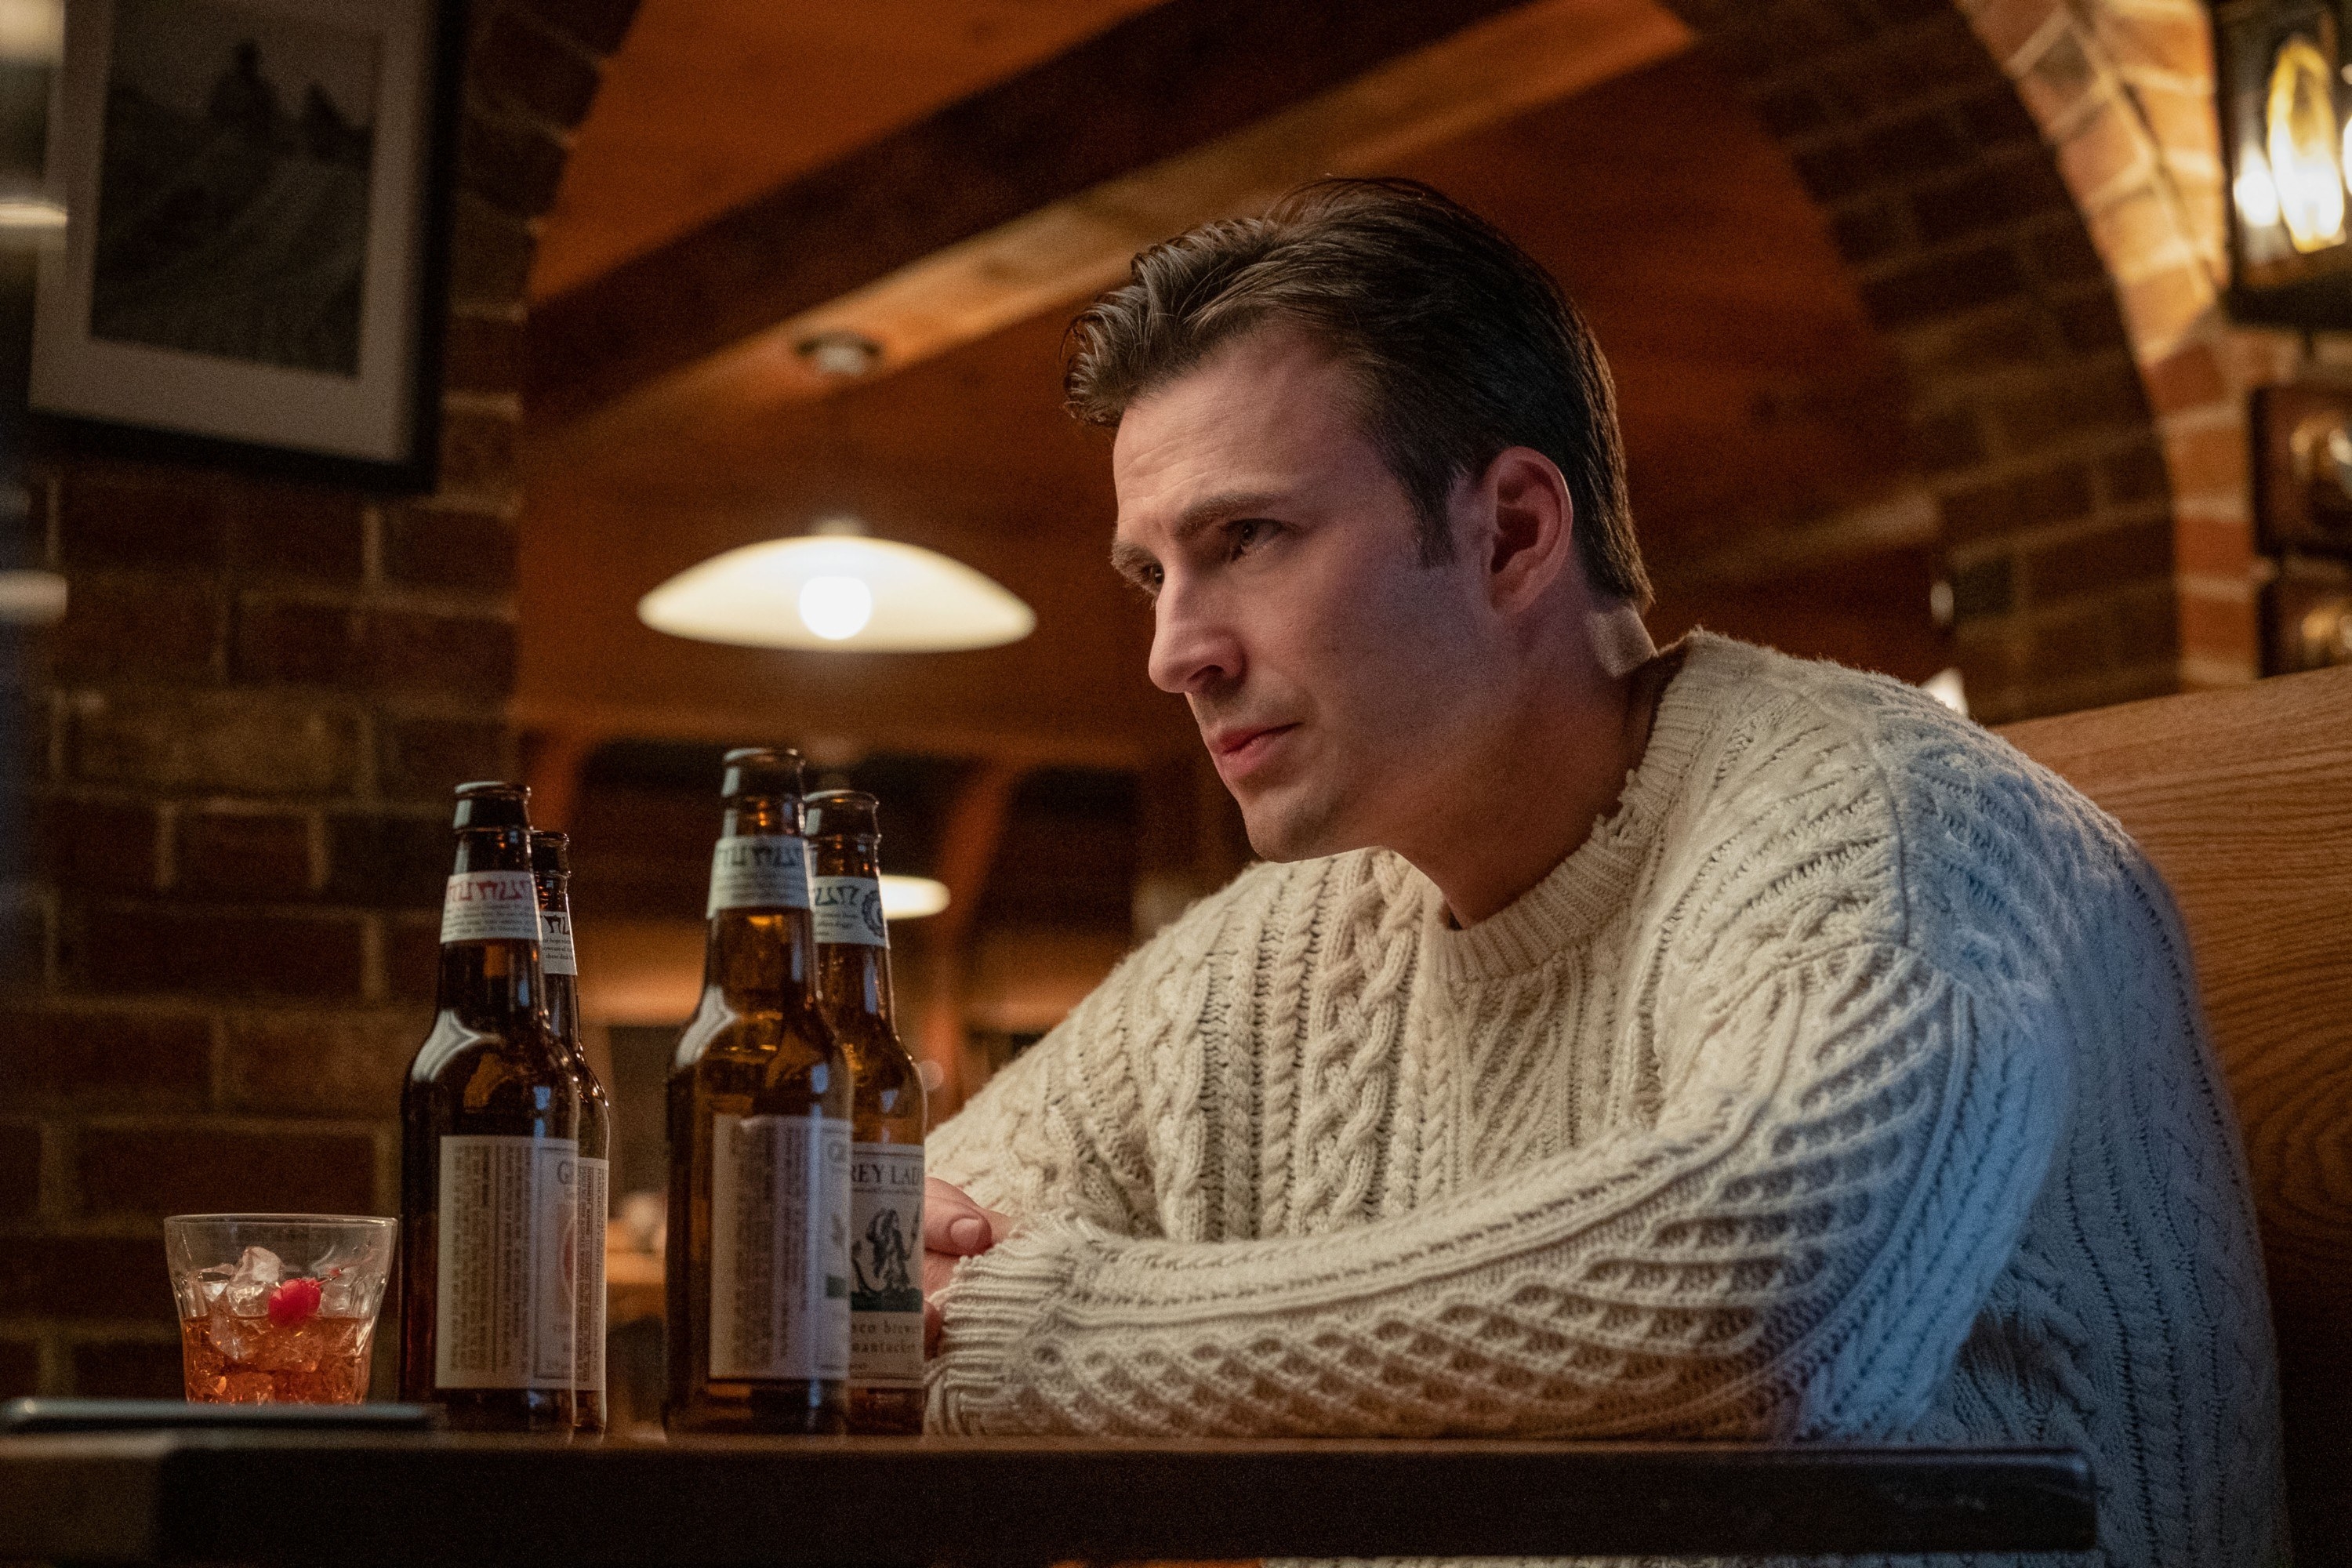 Chris Evans wearing a cream-colored sweater and sitting in a booth with beer bottles on the table